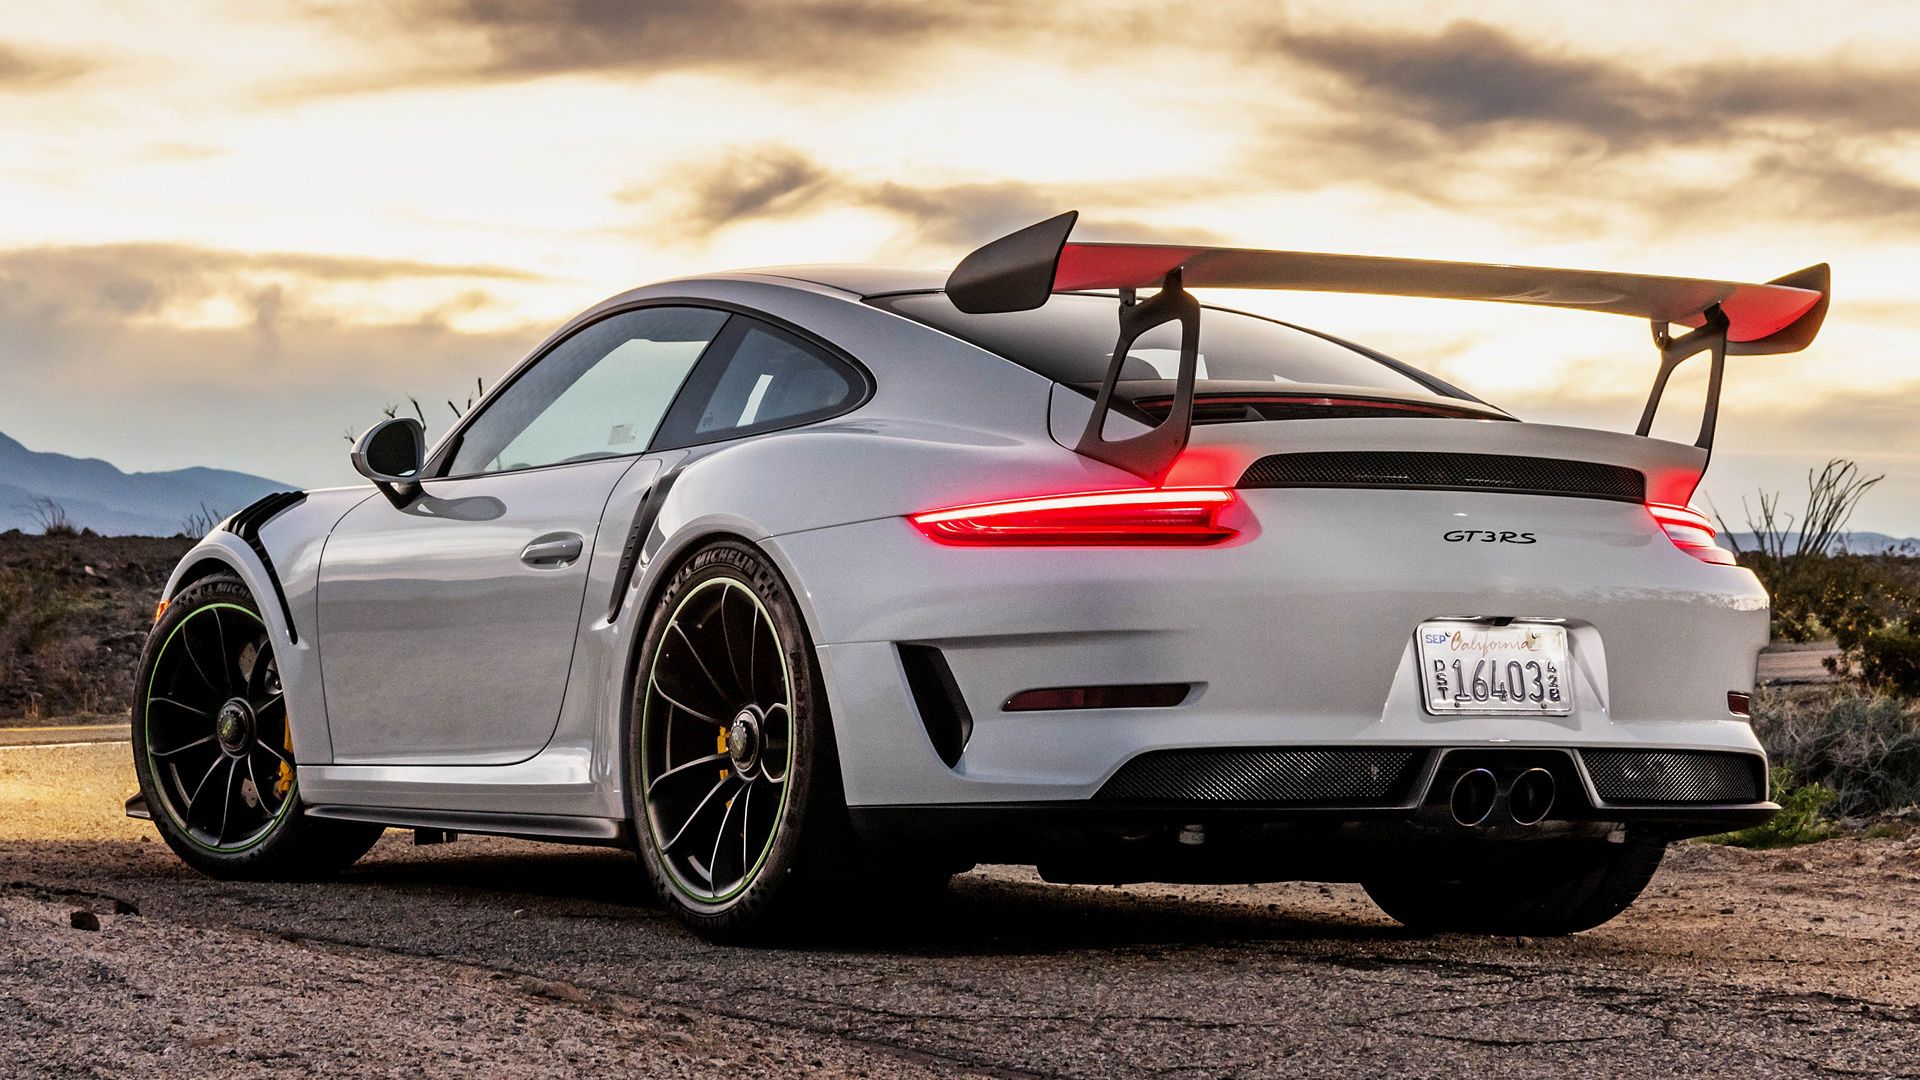 Porsche 911 GT3 RS (US) and HD Image